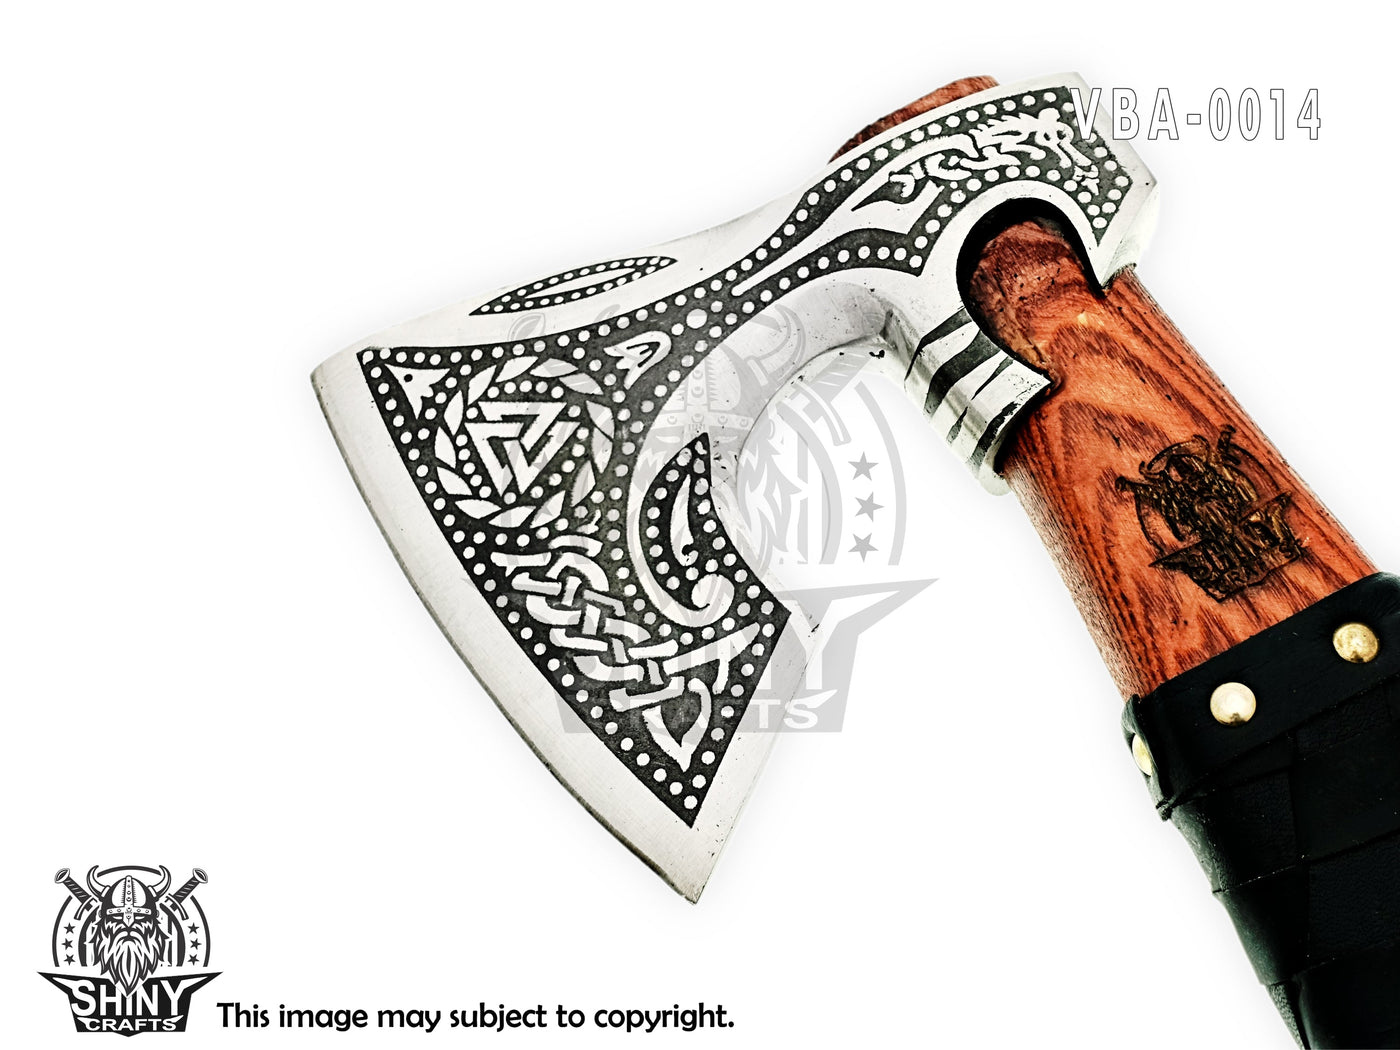 BEARDED AXE - LEATHER WRAPPED — BOMBPROOF BUSHCRAFT